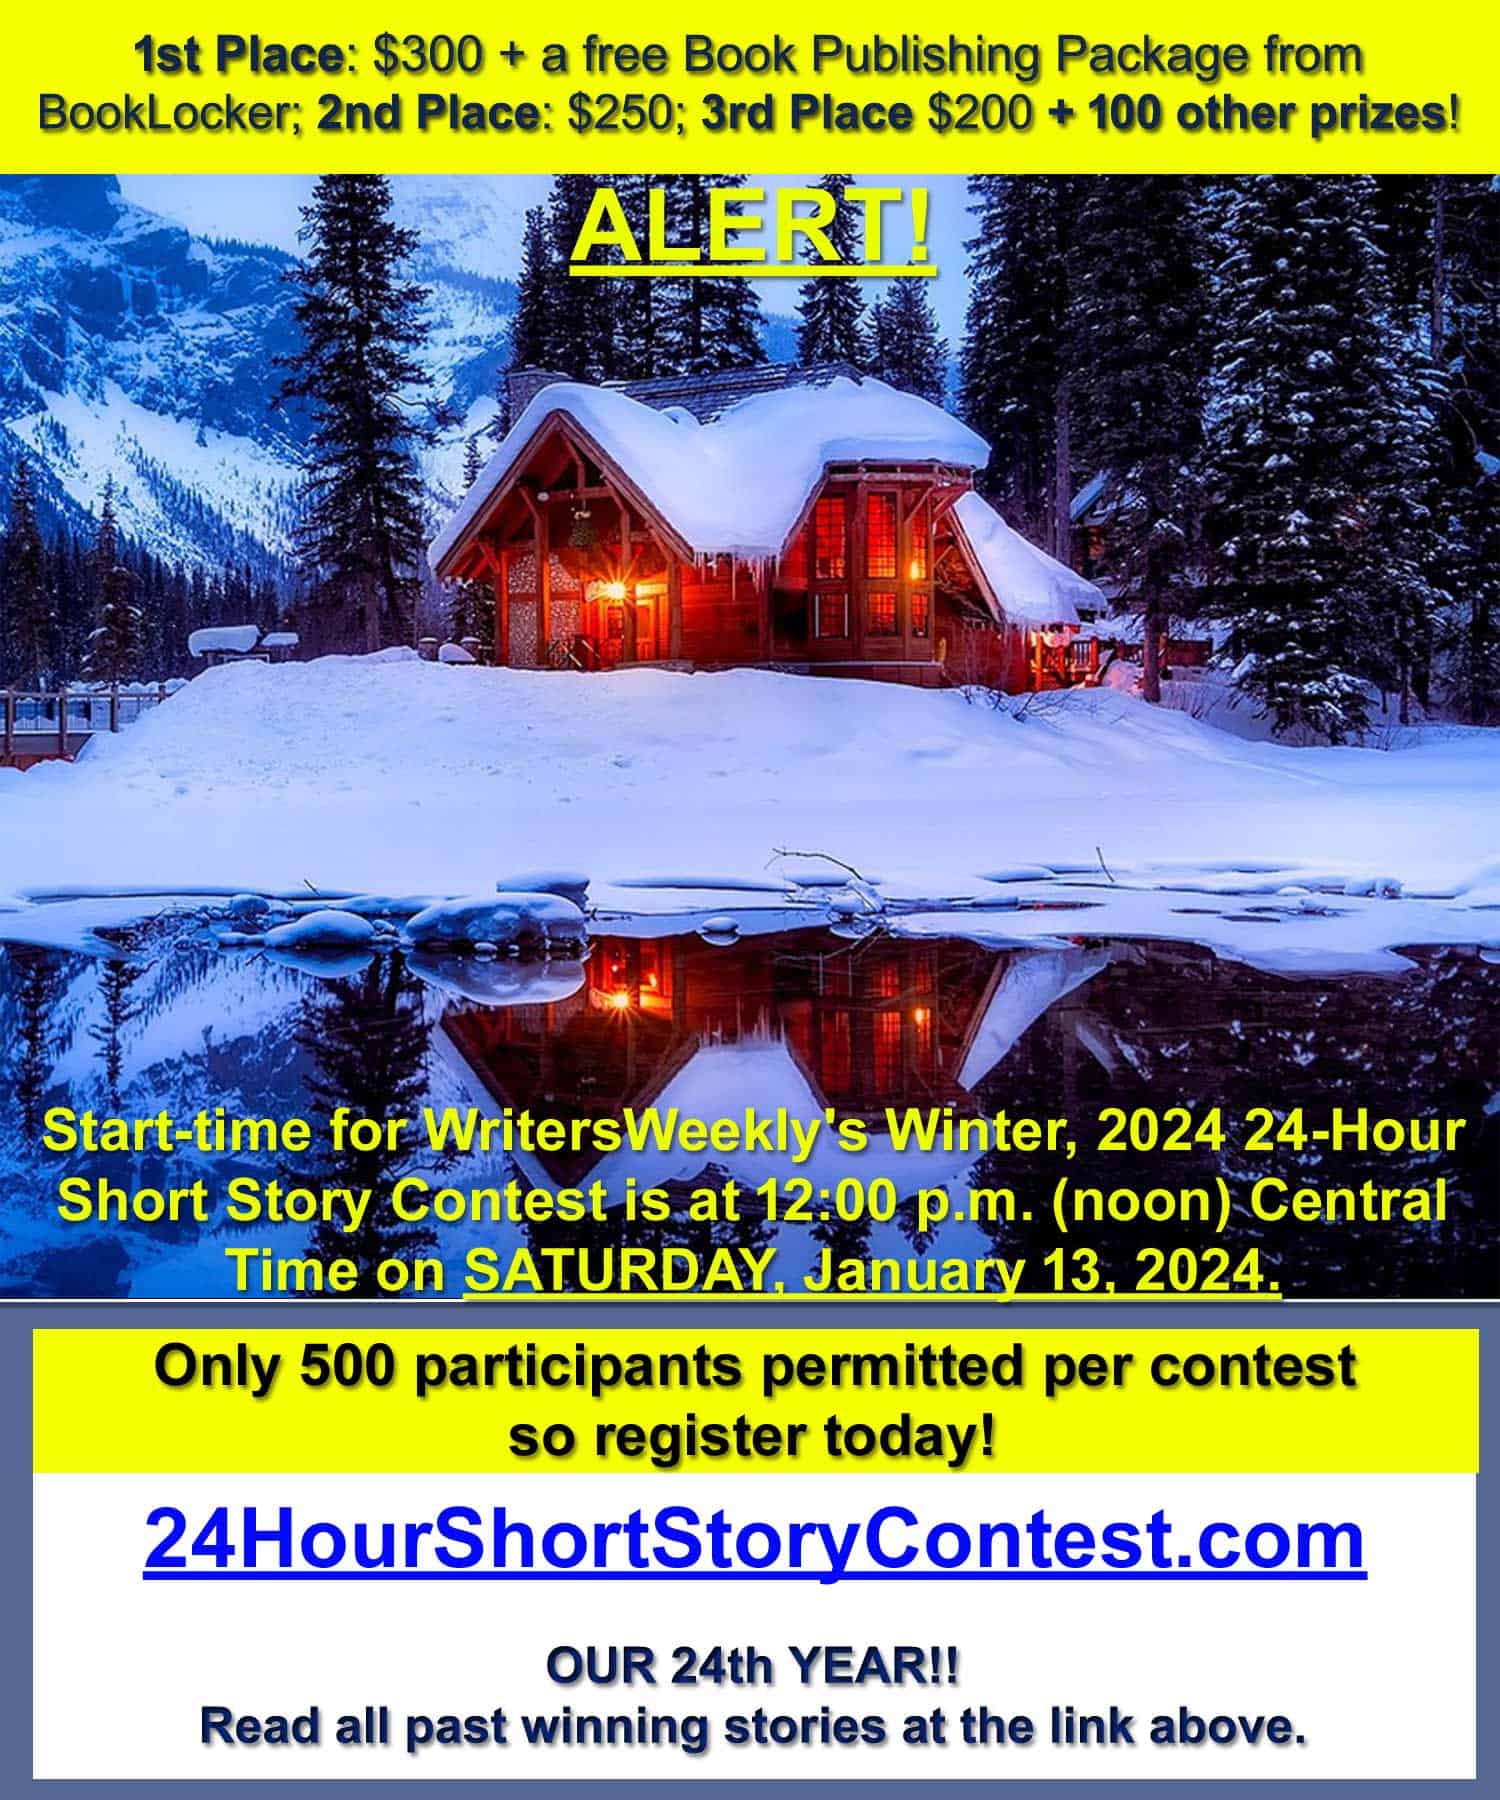 LAST CHANCE! THIS SATURDAY!! What will the Winter, 2024 24-Hour Short Story Contest topic be?!?!